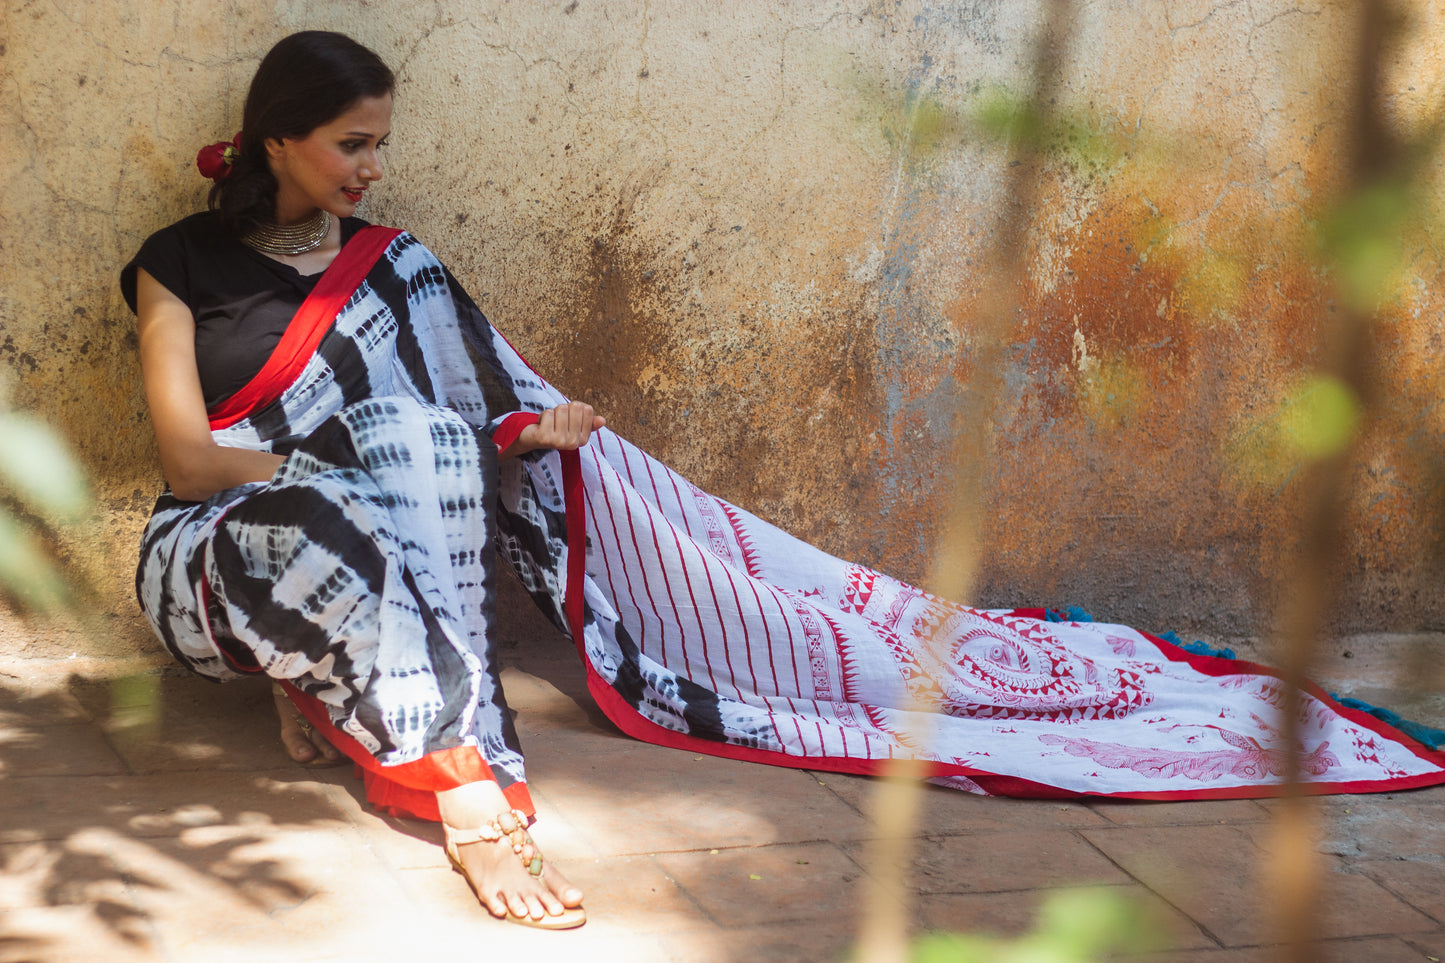 Exclusive Tie Dye Cotton Mul Saree With Handpainted Warli Art (Peacock)